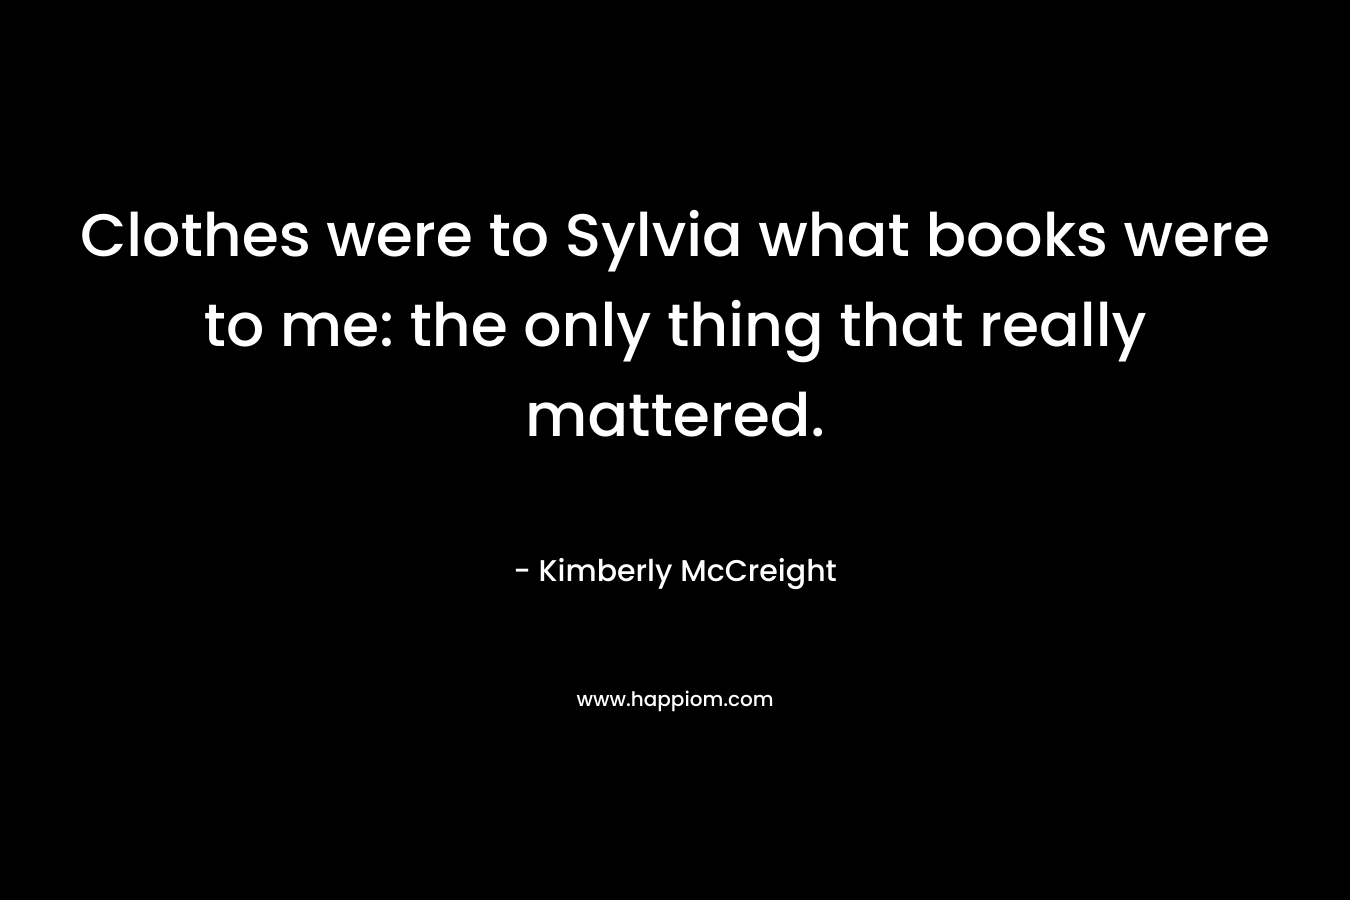 Clothes were to Sylvia what books were to me: the only thing that really mattered. – Kimberly McCreight